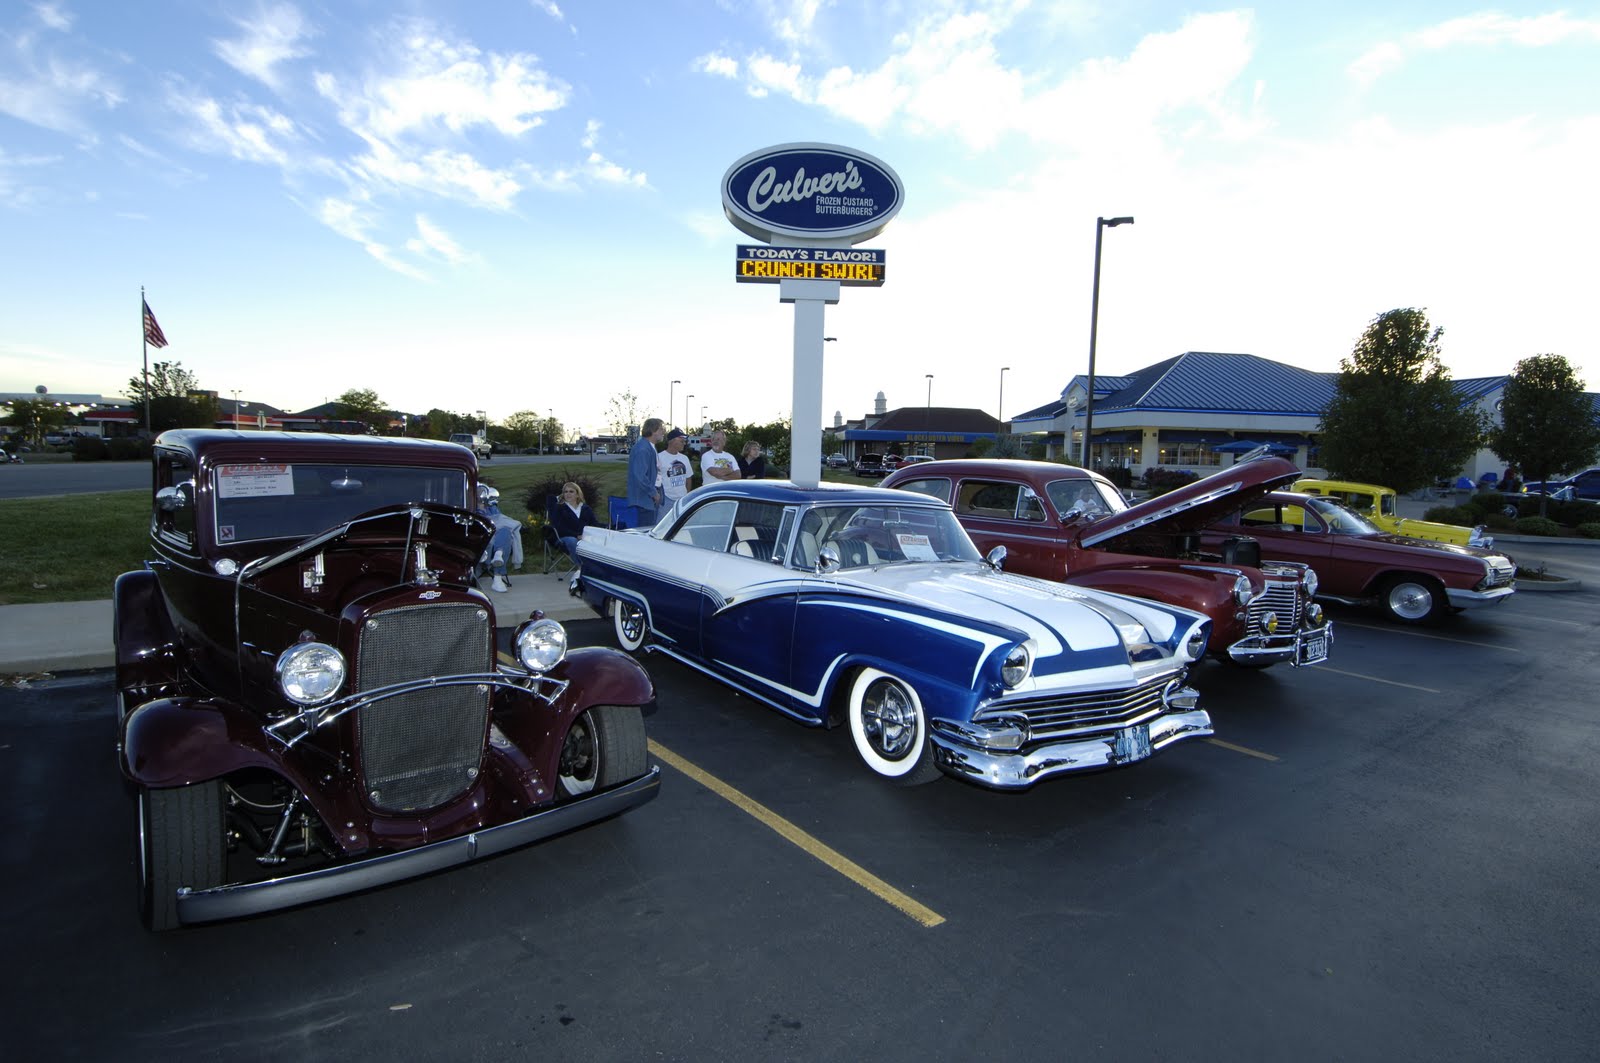 This Is Indiana Cruisin' with Culver's Car Show